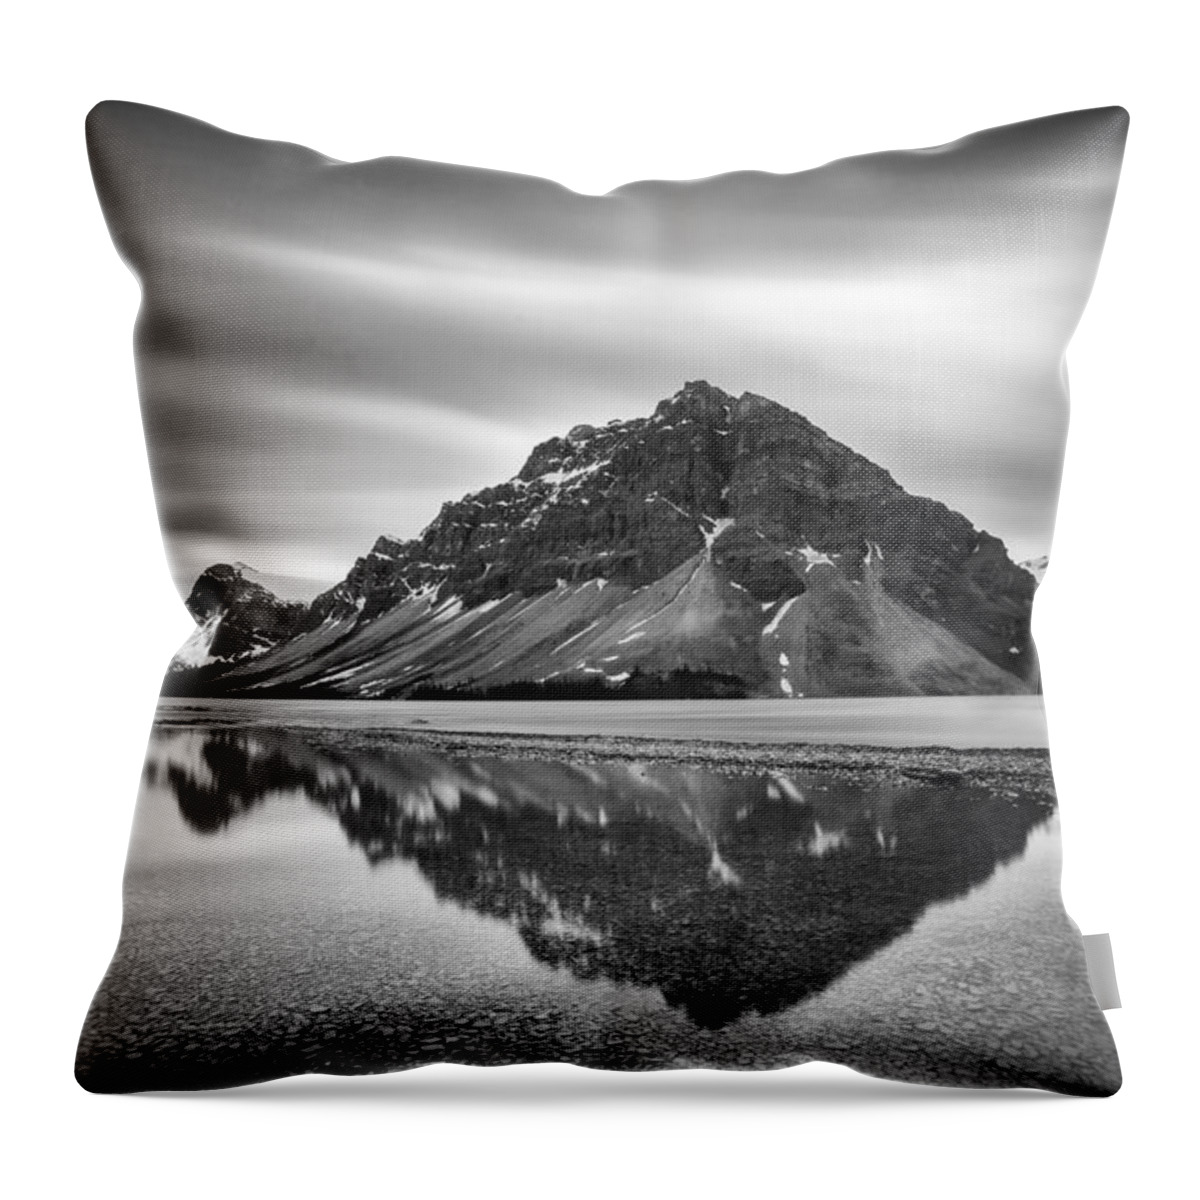 Horizontal Throw Pillow featuring the photograph Reflecting Bow by Jon Glaser